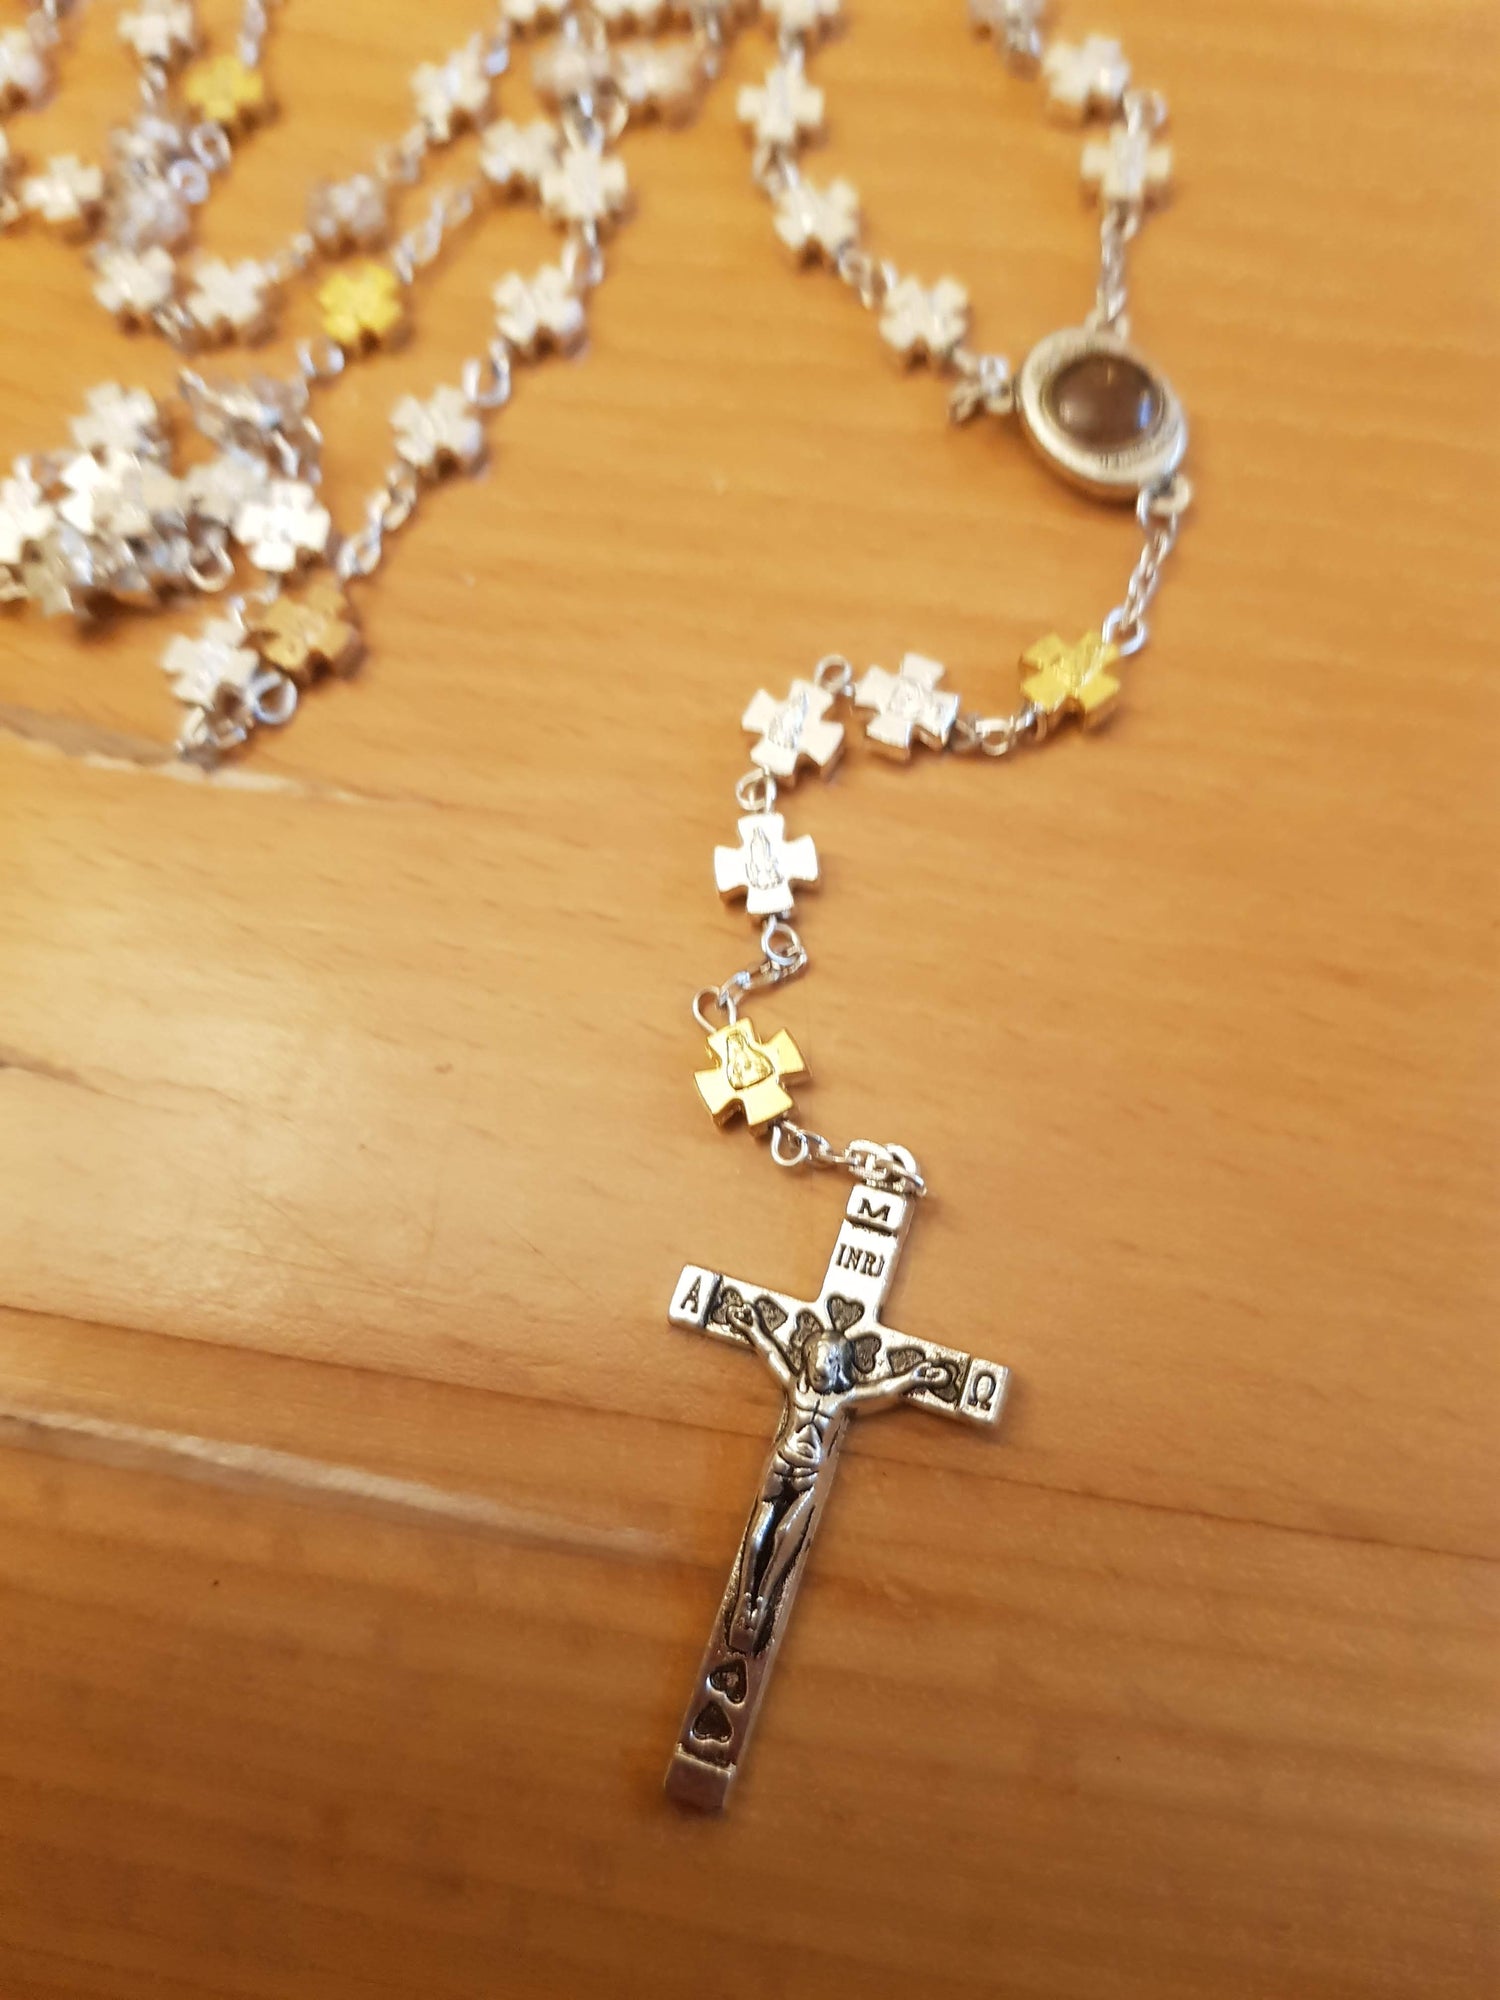 Bluenoemi Rosary silver Rosary from the Holy Land - Jerusalem Cross - Silver Plated Beads from Bethlehem.